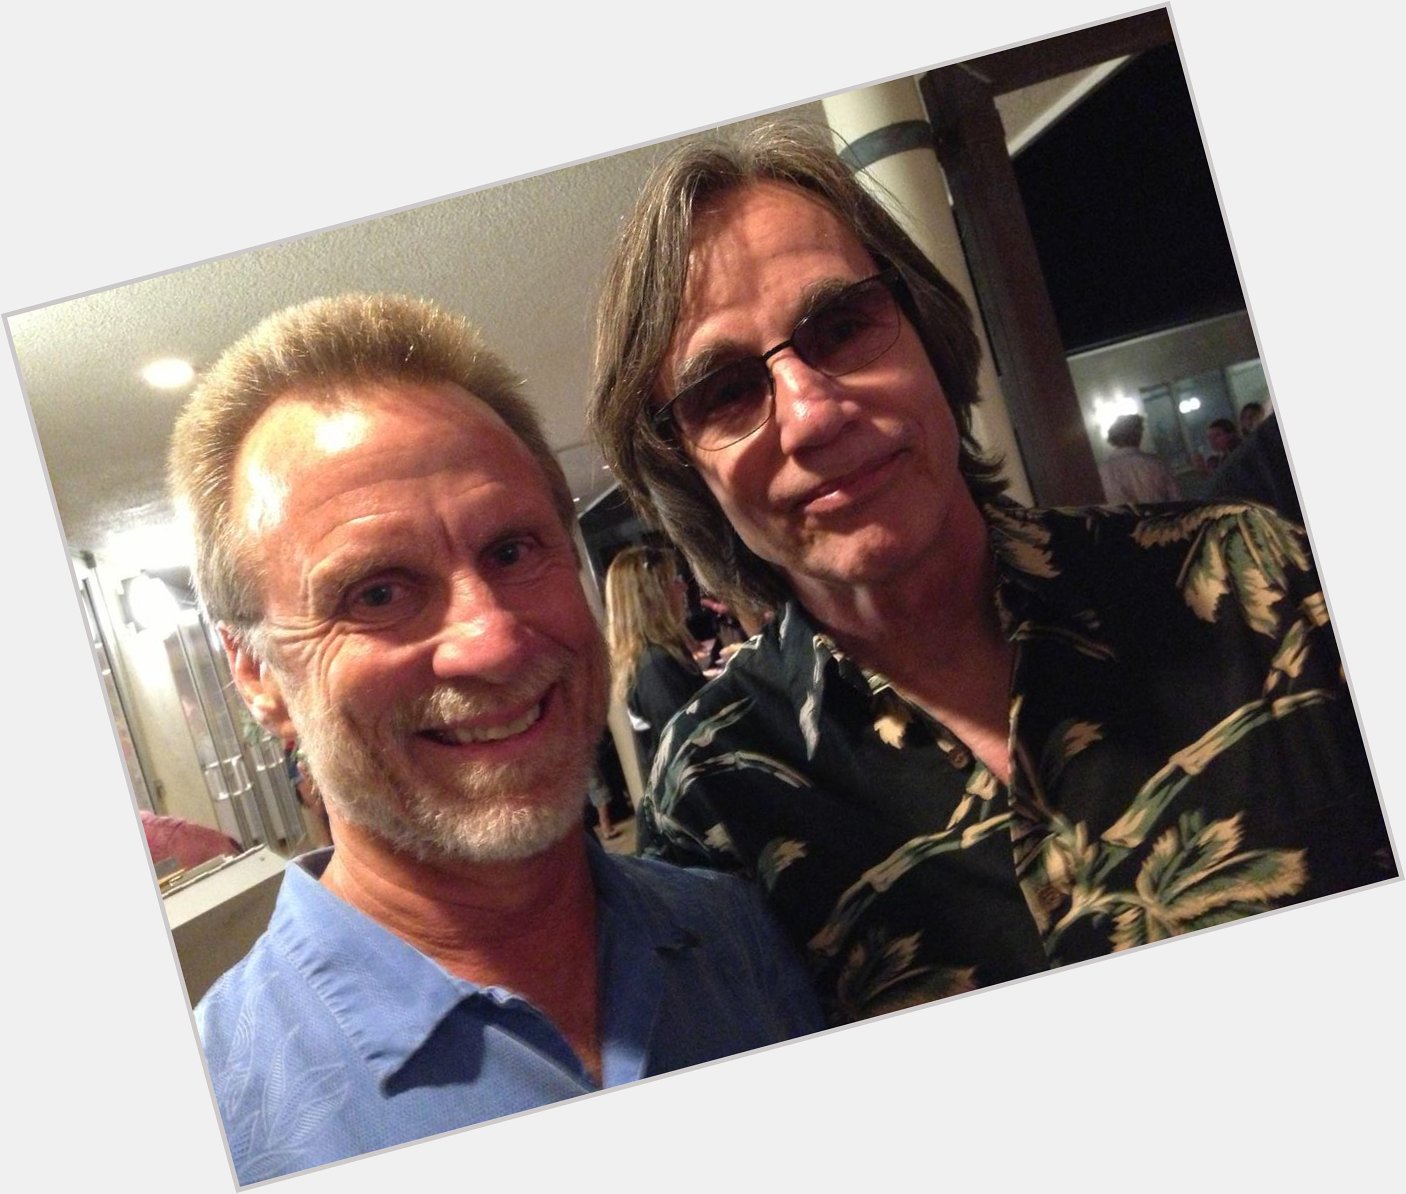 Happy Birthday to my BIGGEST musical influence/inspiration, Jackson Browne! Wishing you an amazing day of celebration 